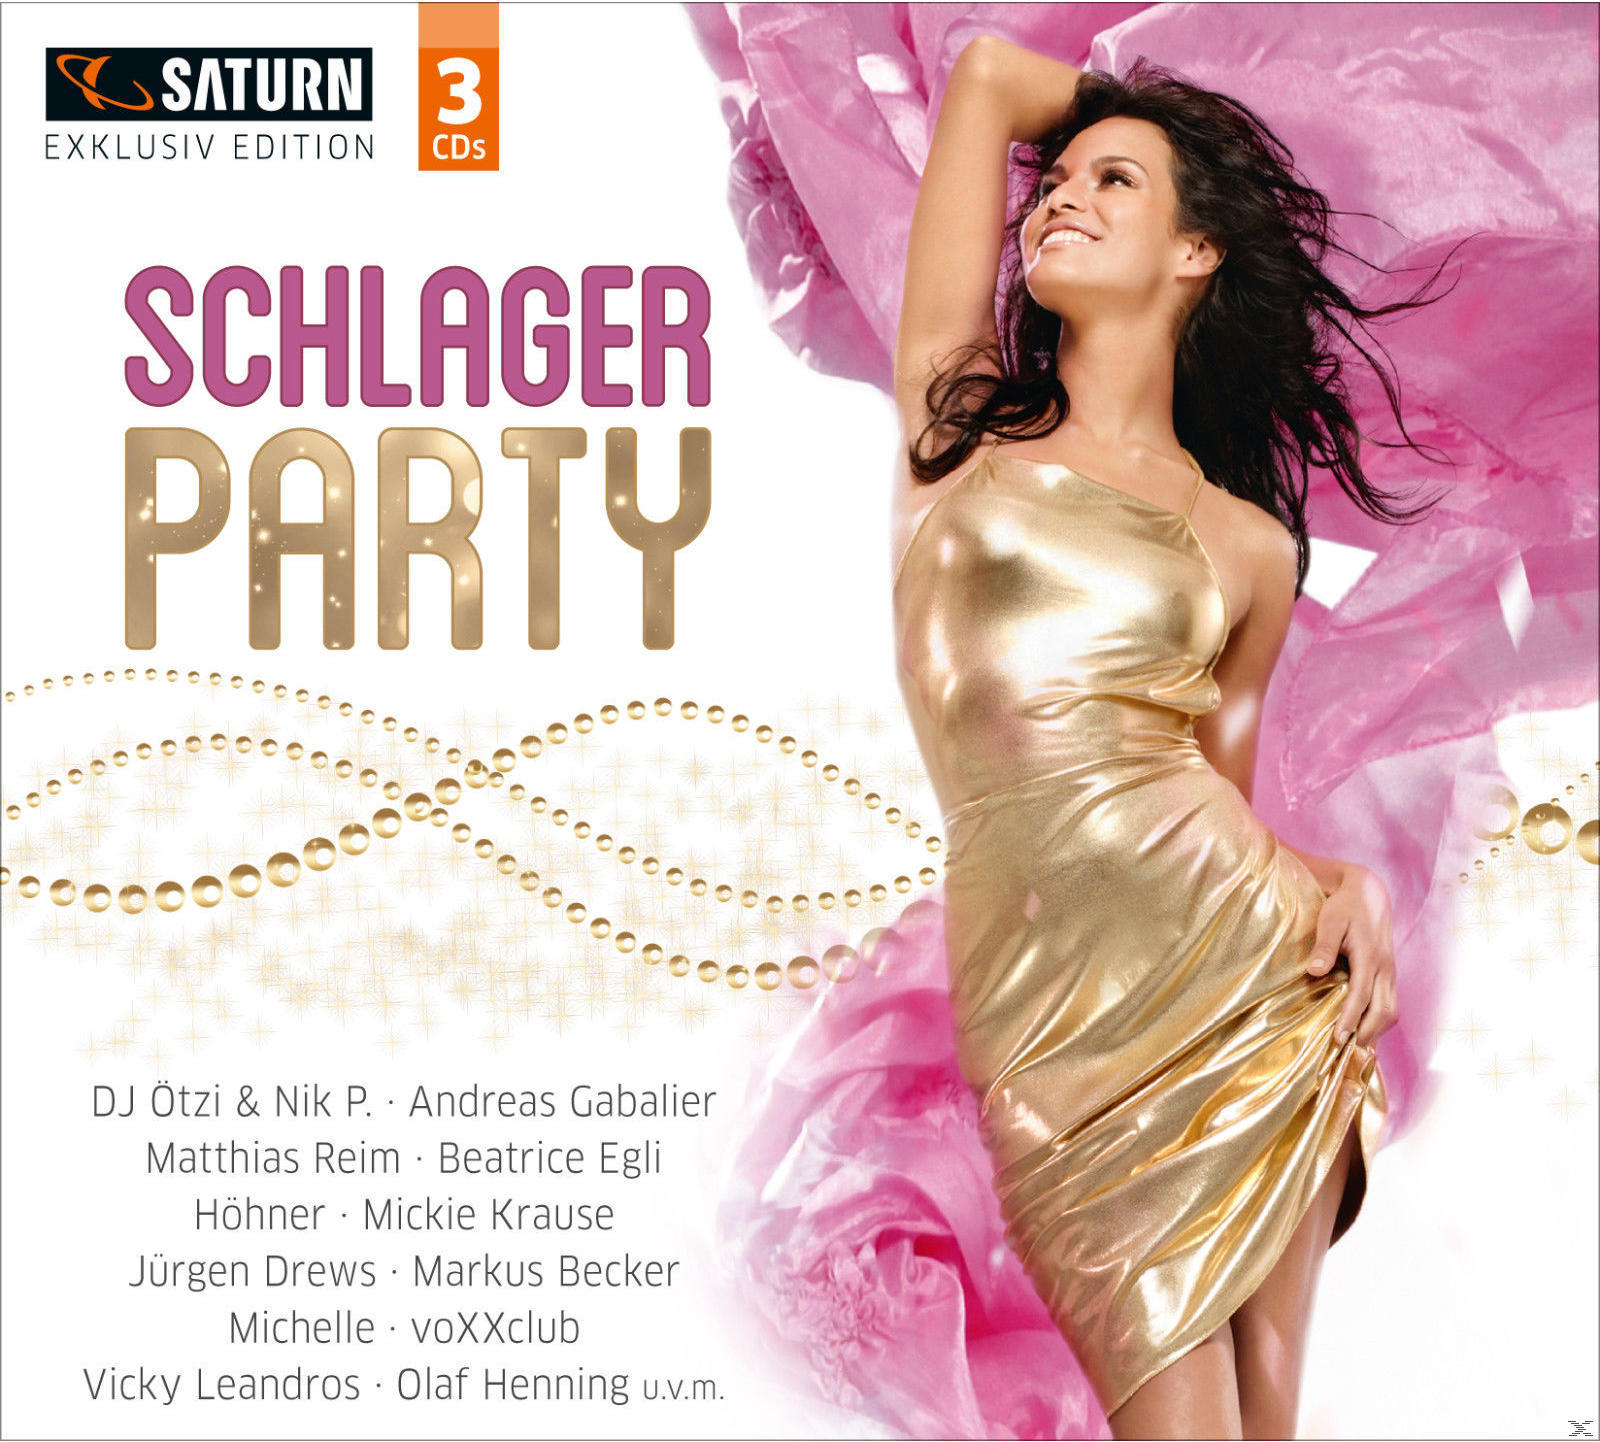 - VARIOUS - Exclusiv) Party (CD) (Saturn Schlager